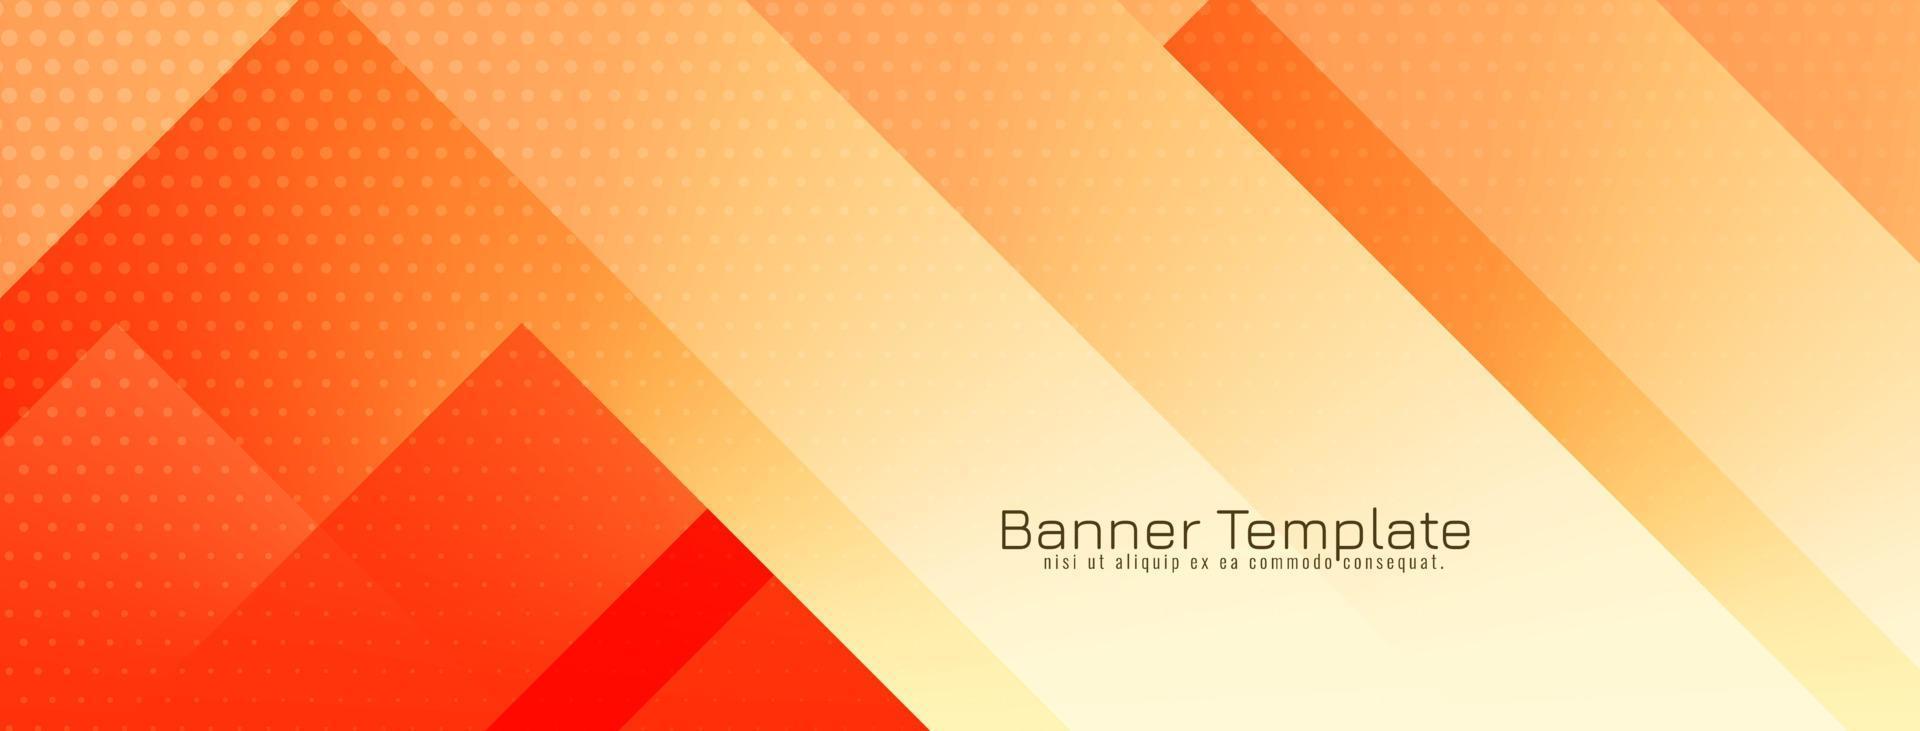 Abstract yellow and red decorative geometric corporate banner vector